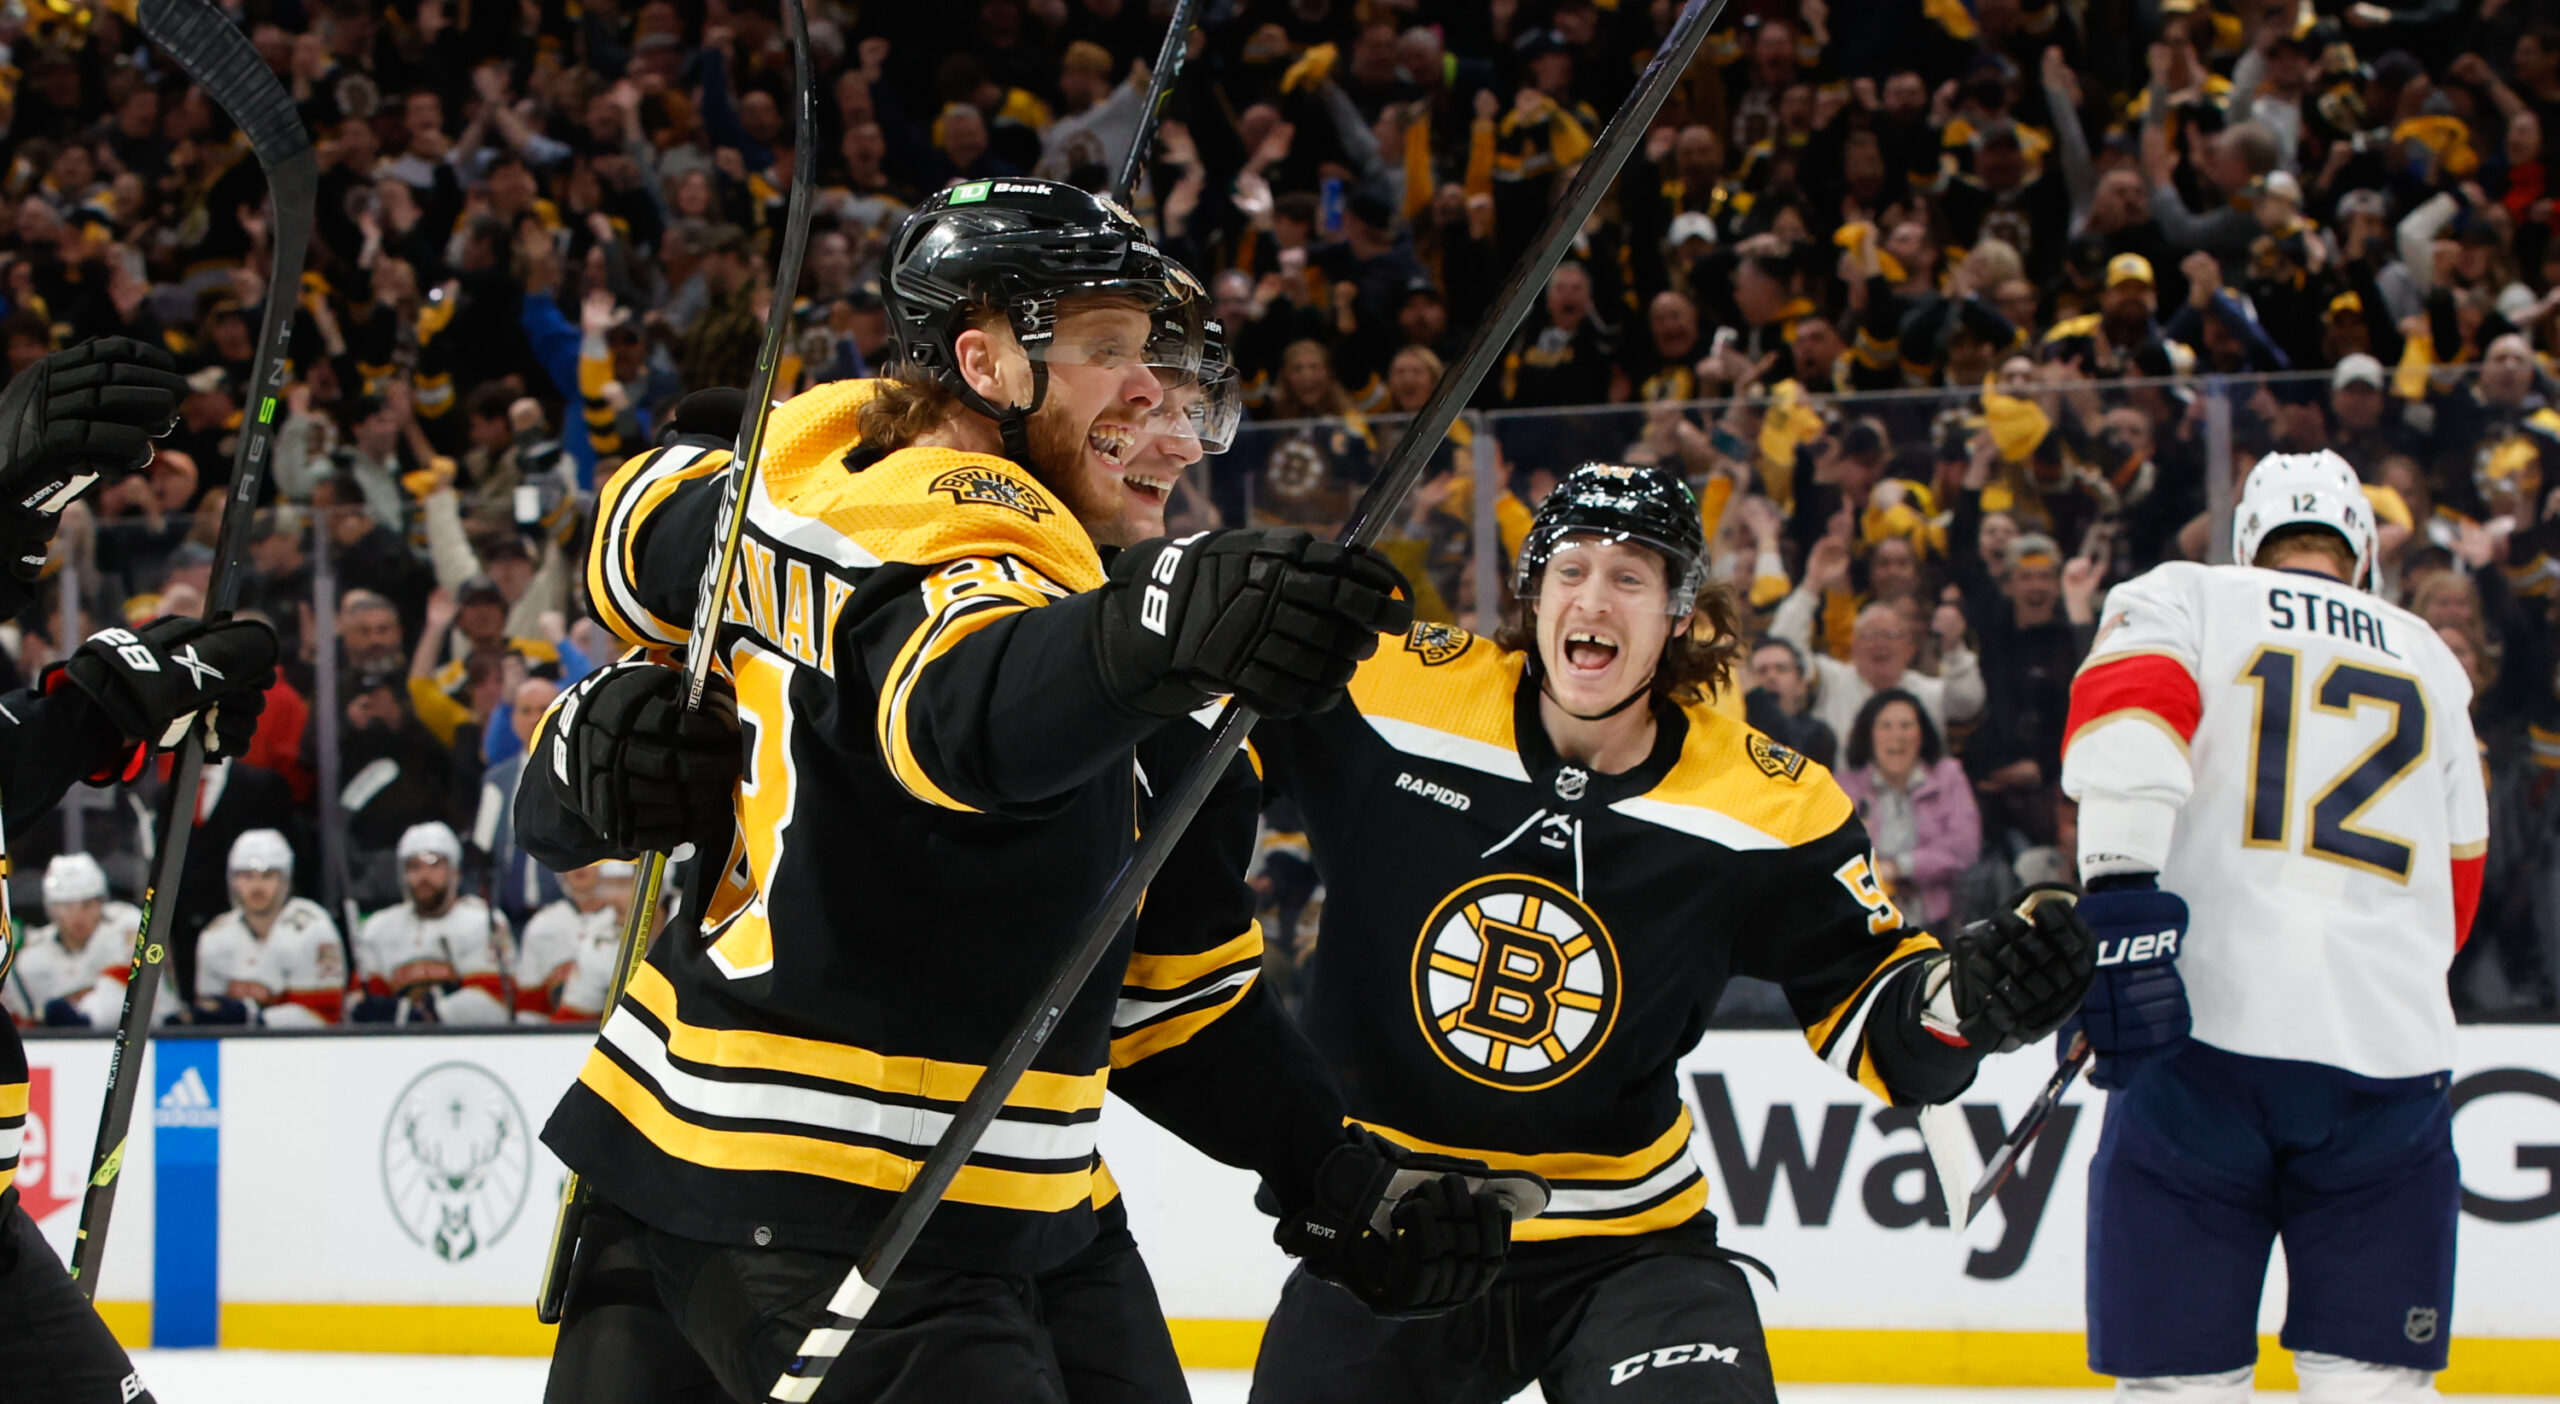 Presidents' Trophy curse: Bruins' collapse extends Stanley Cup